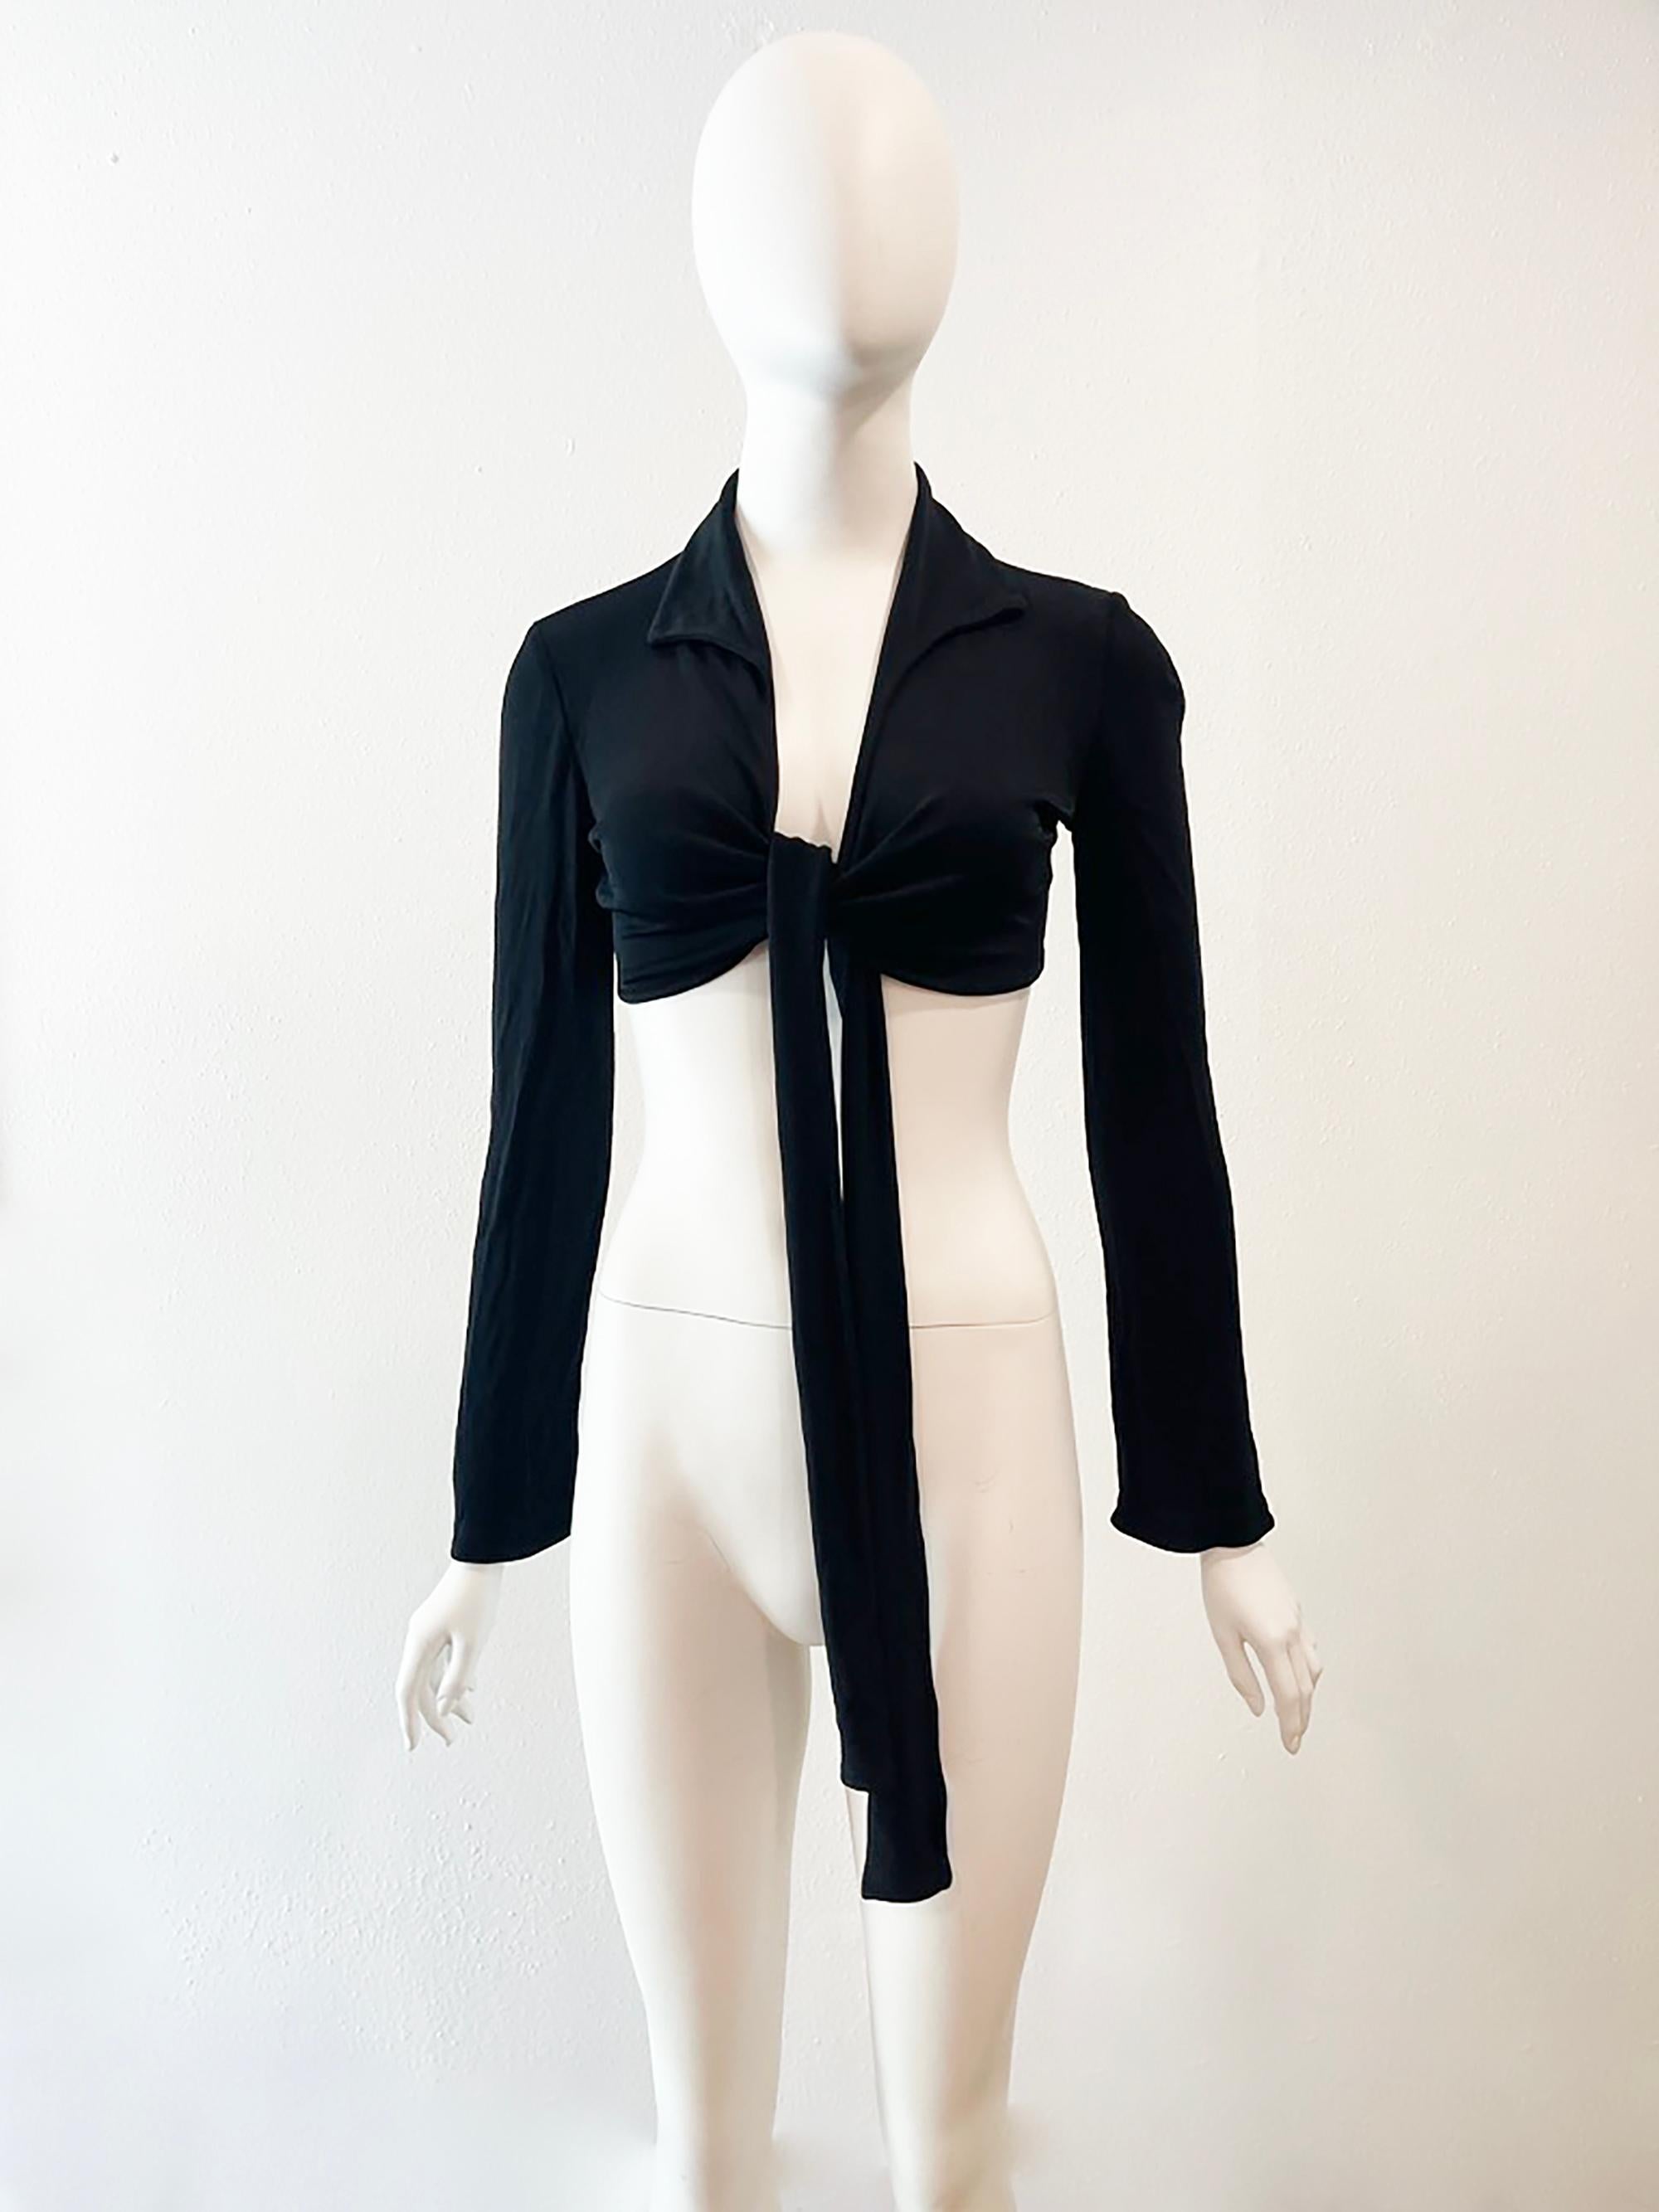 S/S 1996 Gucci by Tom Ford Black Cropped Tie Top In Excellent Condition In Austin, TX